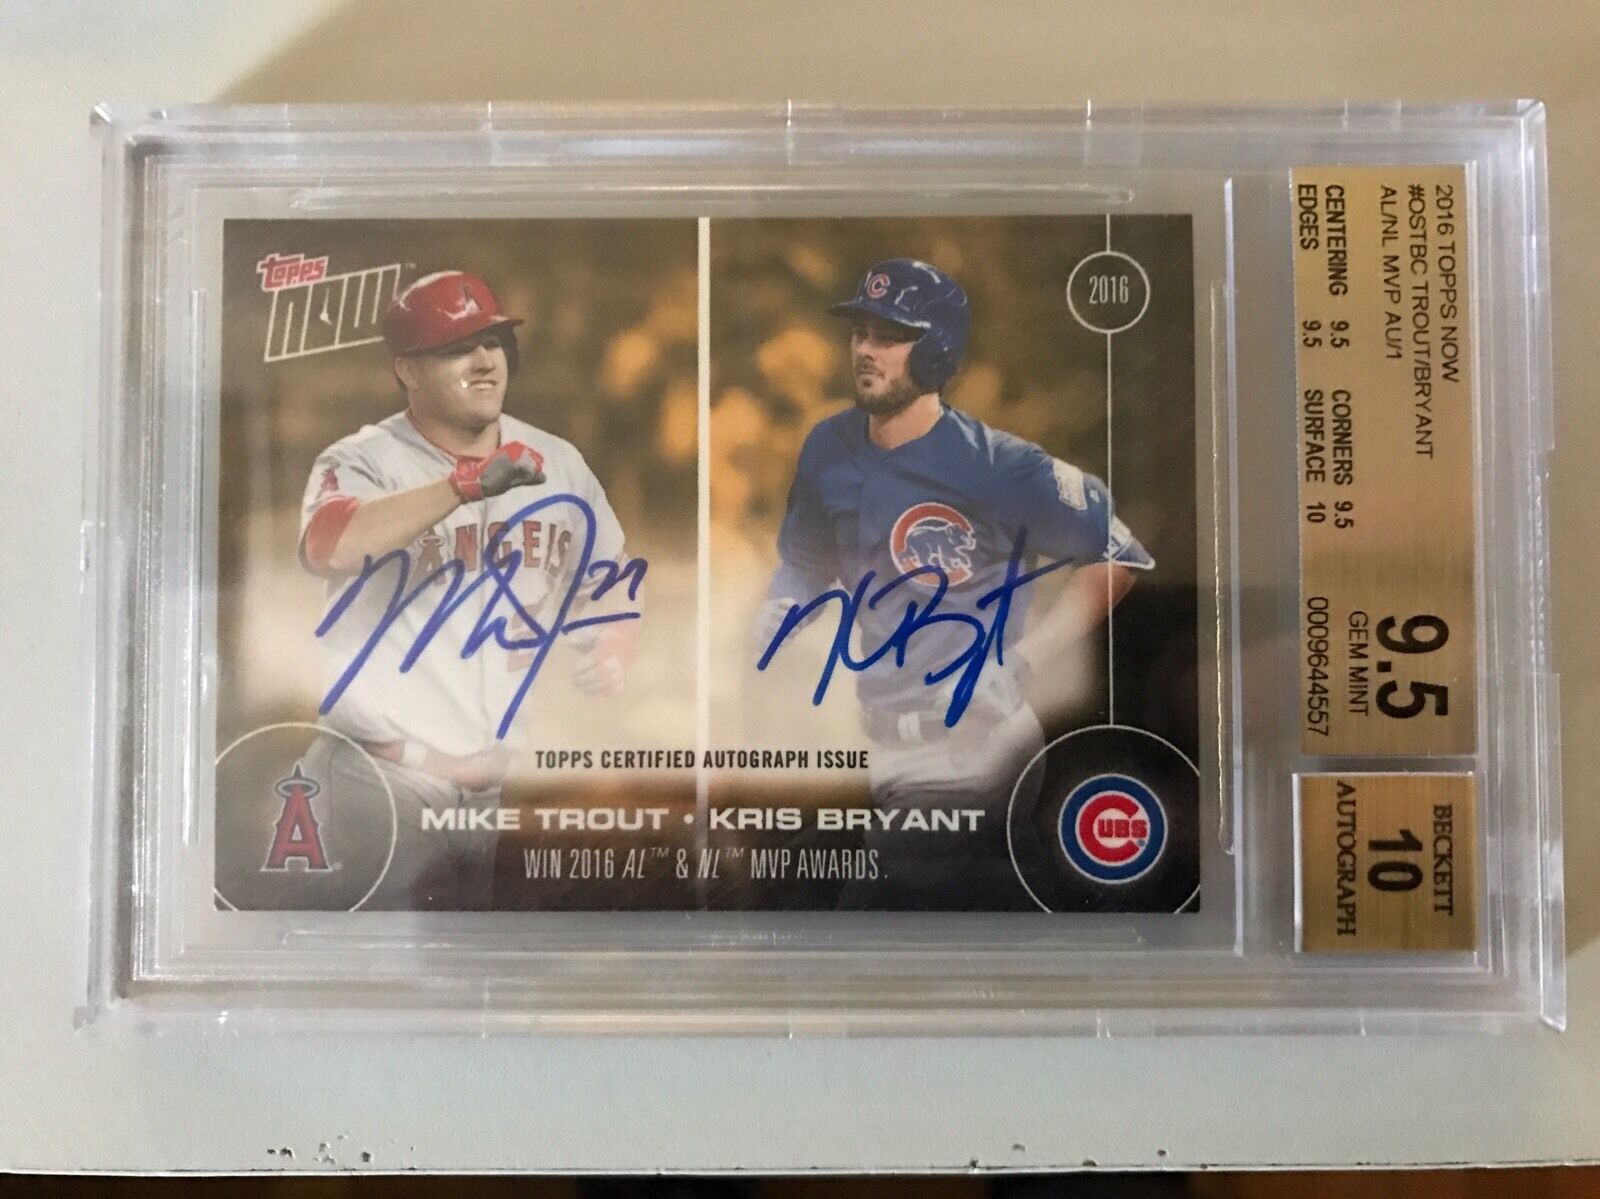 ON-CARD DUAL-AUTO 1/1 MIKE TROUT/KRIS BRYANT WIN 2016 MVP AWARDS BGS 9.5/10